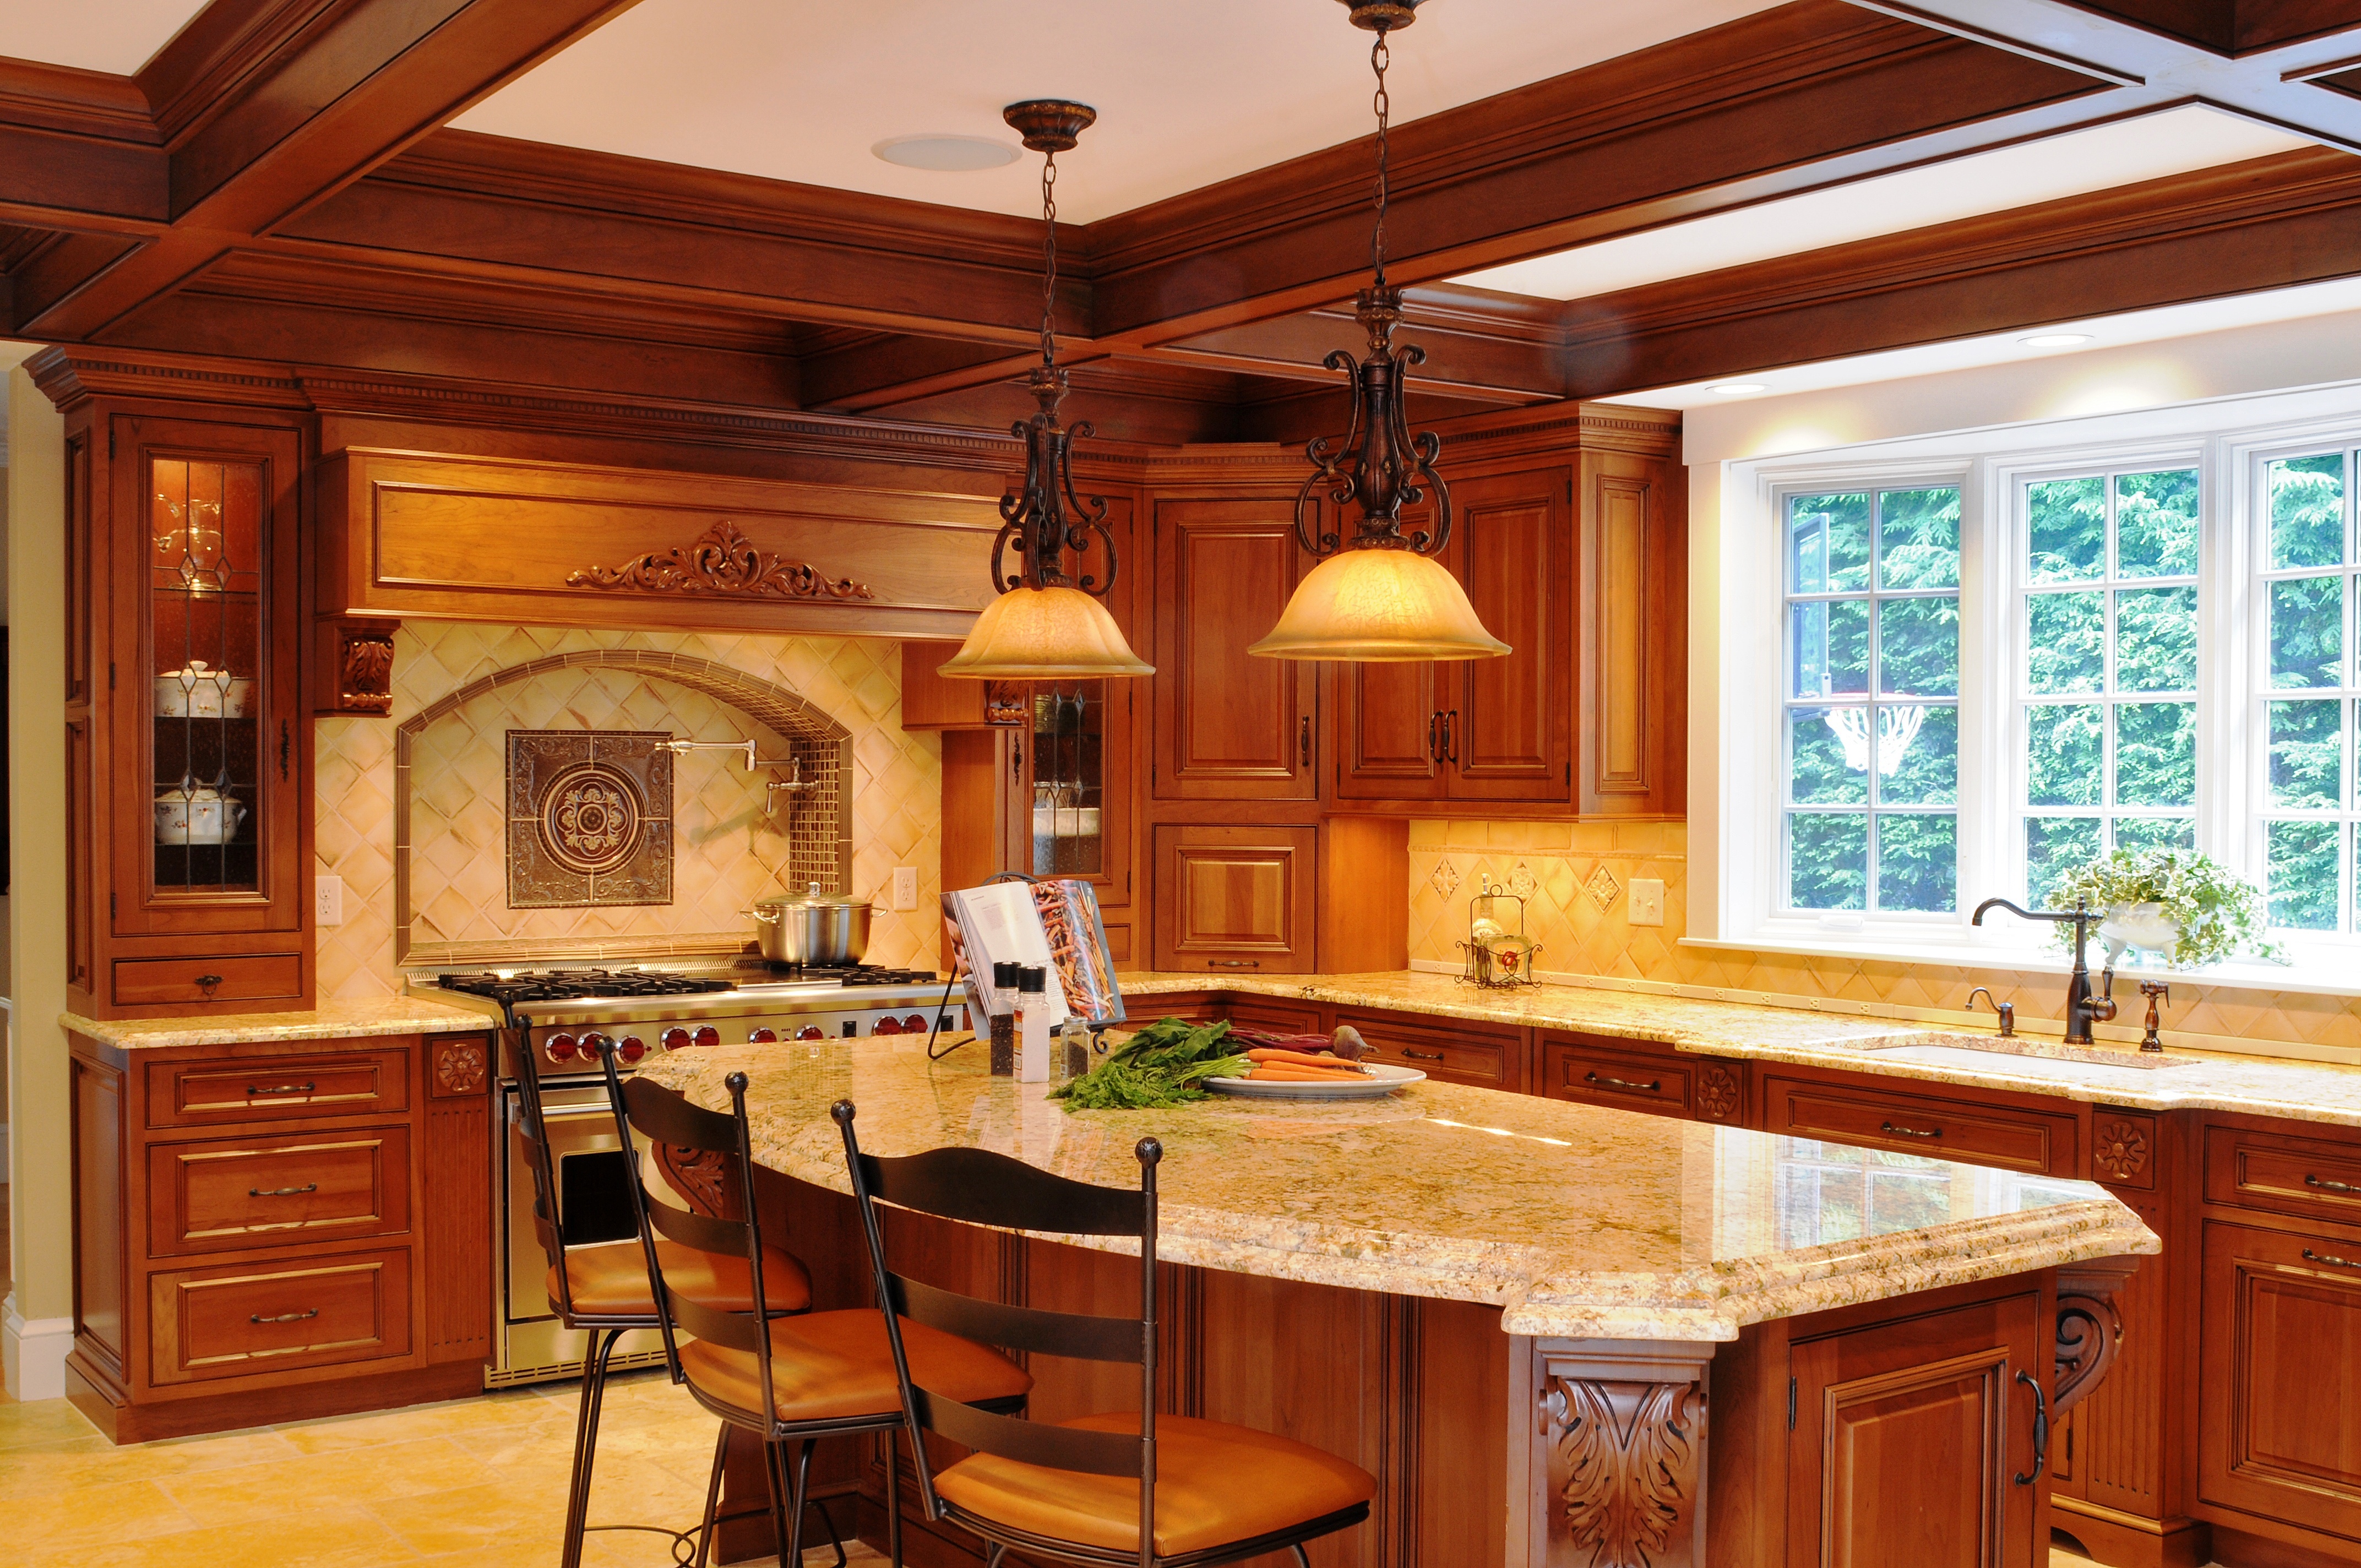 Reface-or-replace-kitchen-cabinetry.jpg